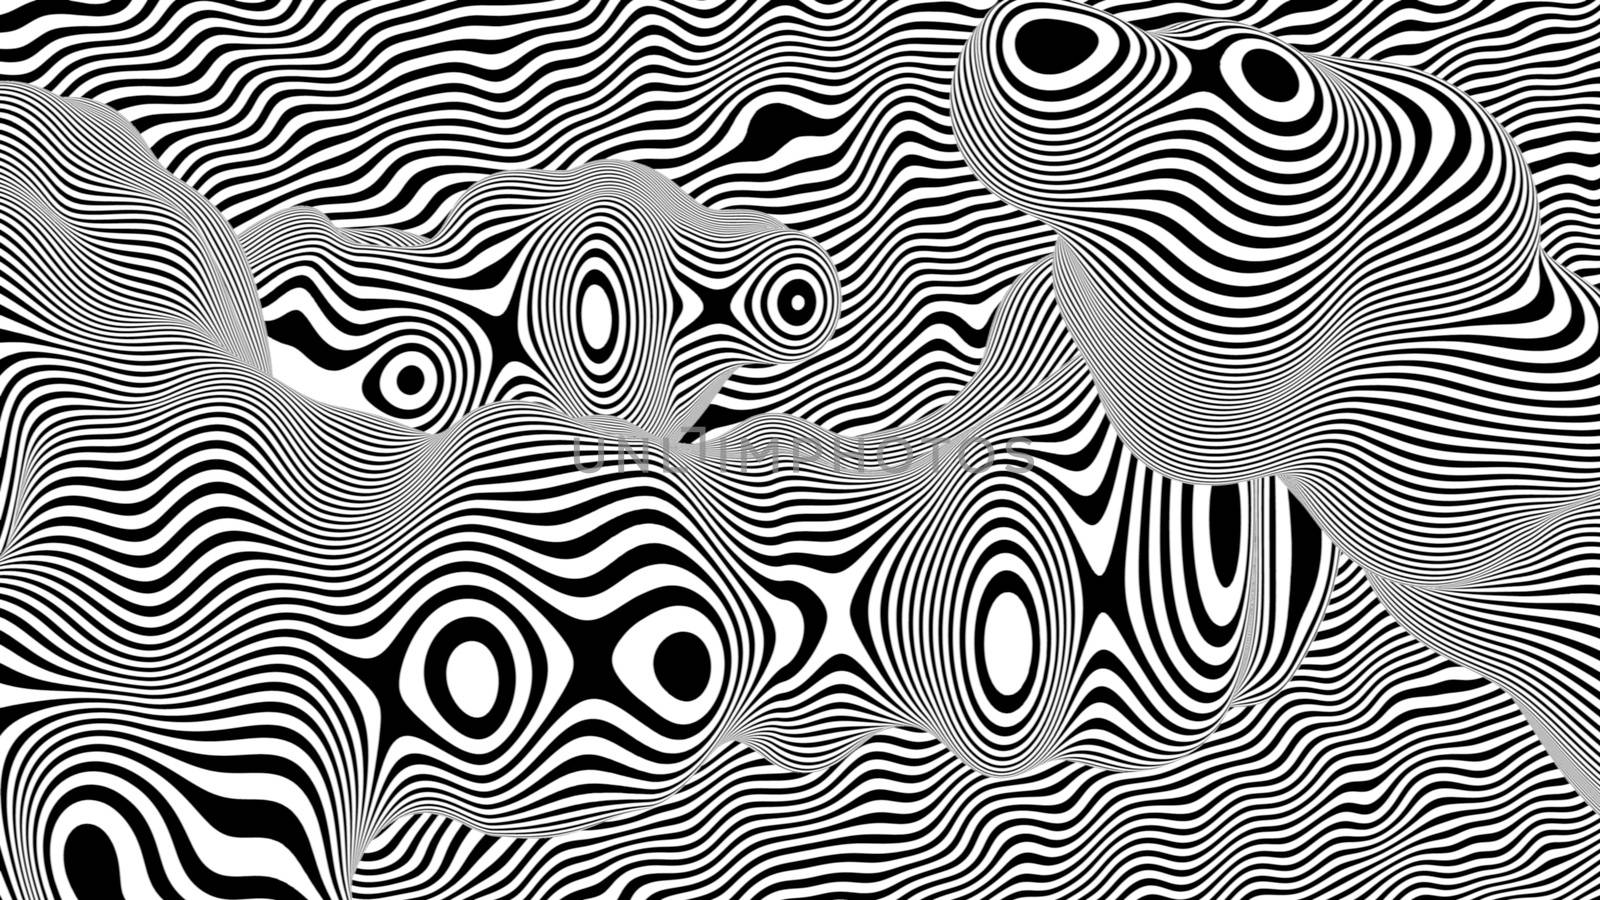 Mesmerizing 3d illustration of fluid white and black waves changing their contours and shapes. They look like alive images optically curious and cheerful.